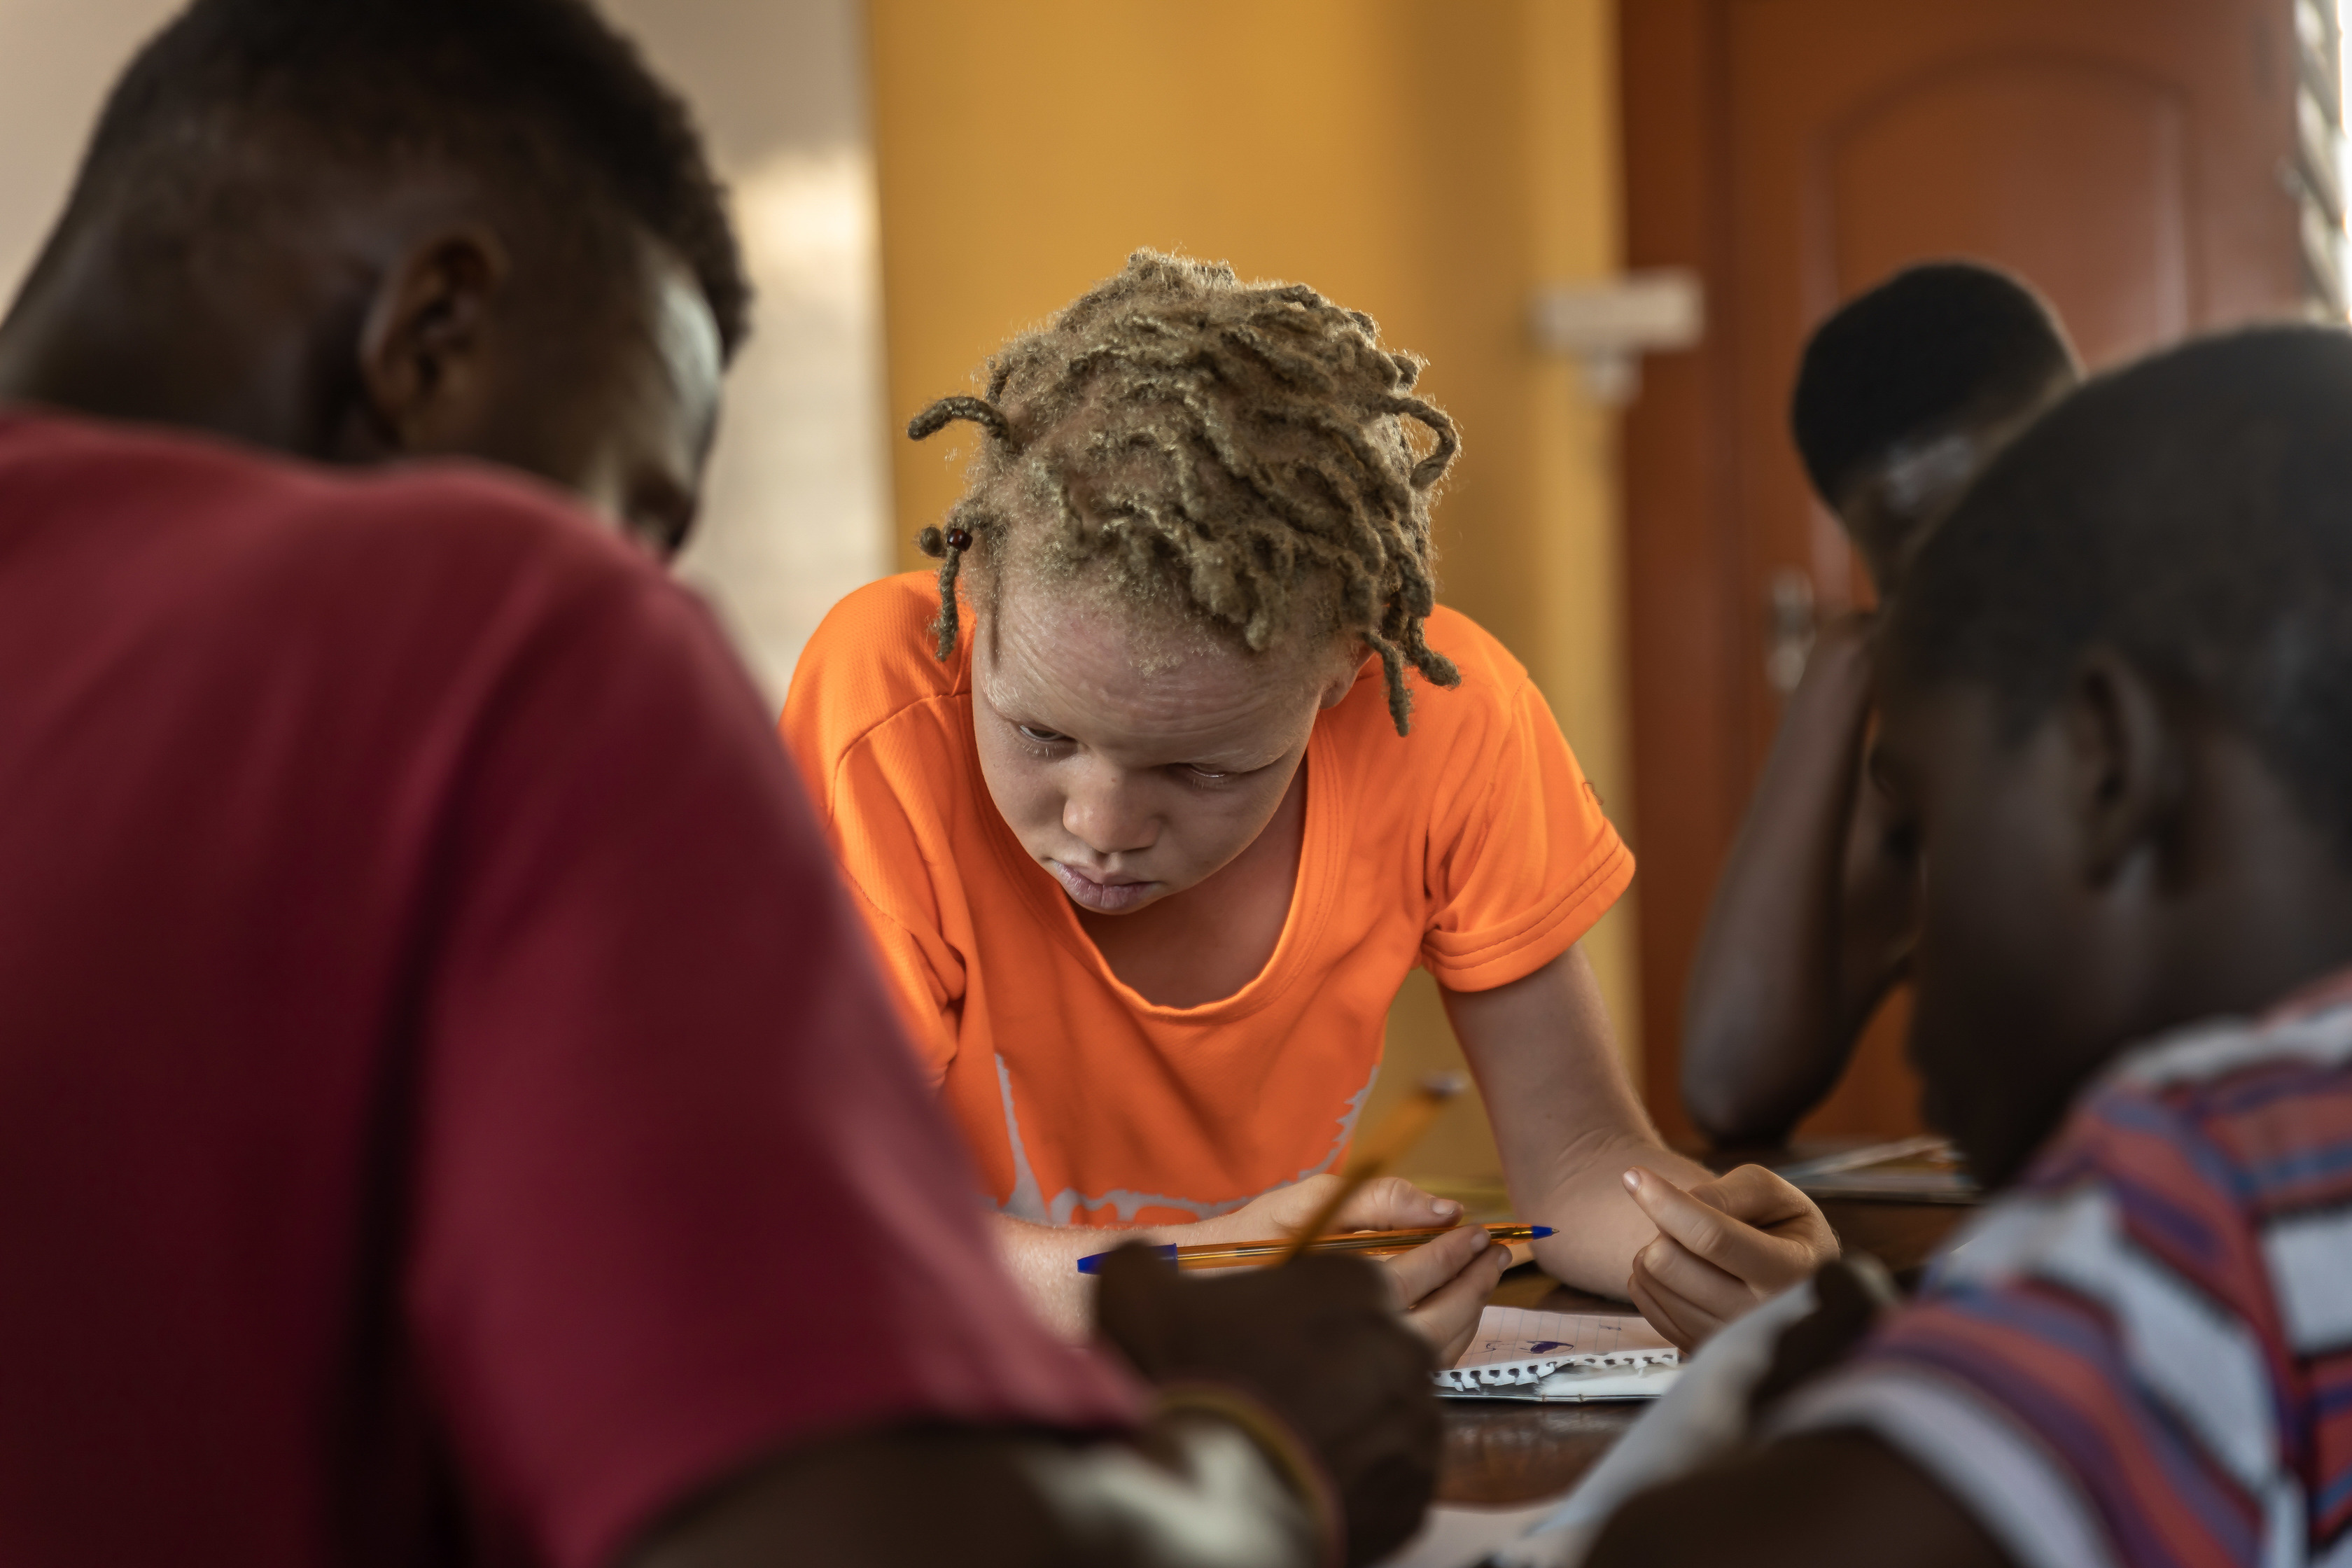 The organization’s after-school program provides small group lessons that focus on mathematics, English, and science. A little girl with albinism is seen here participating in the activities among other children. 